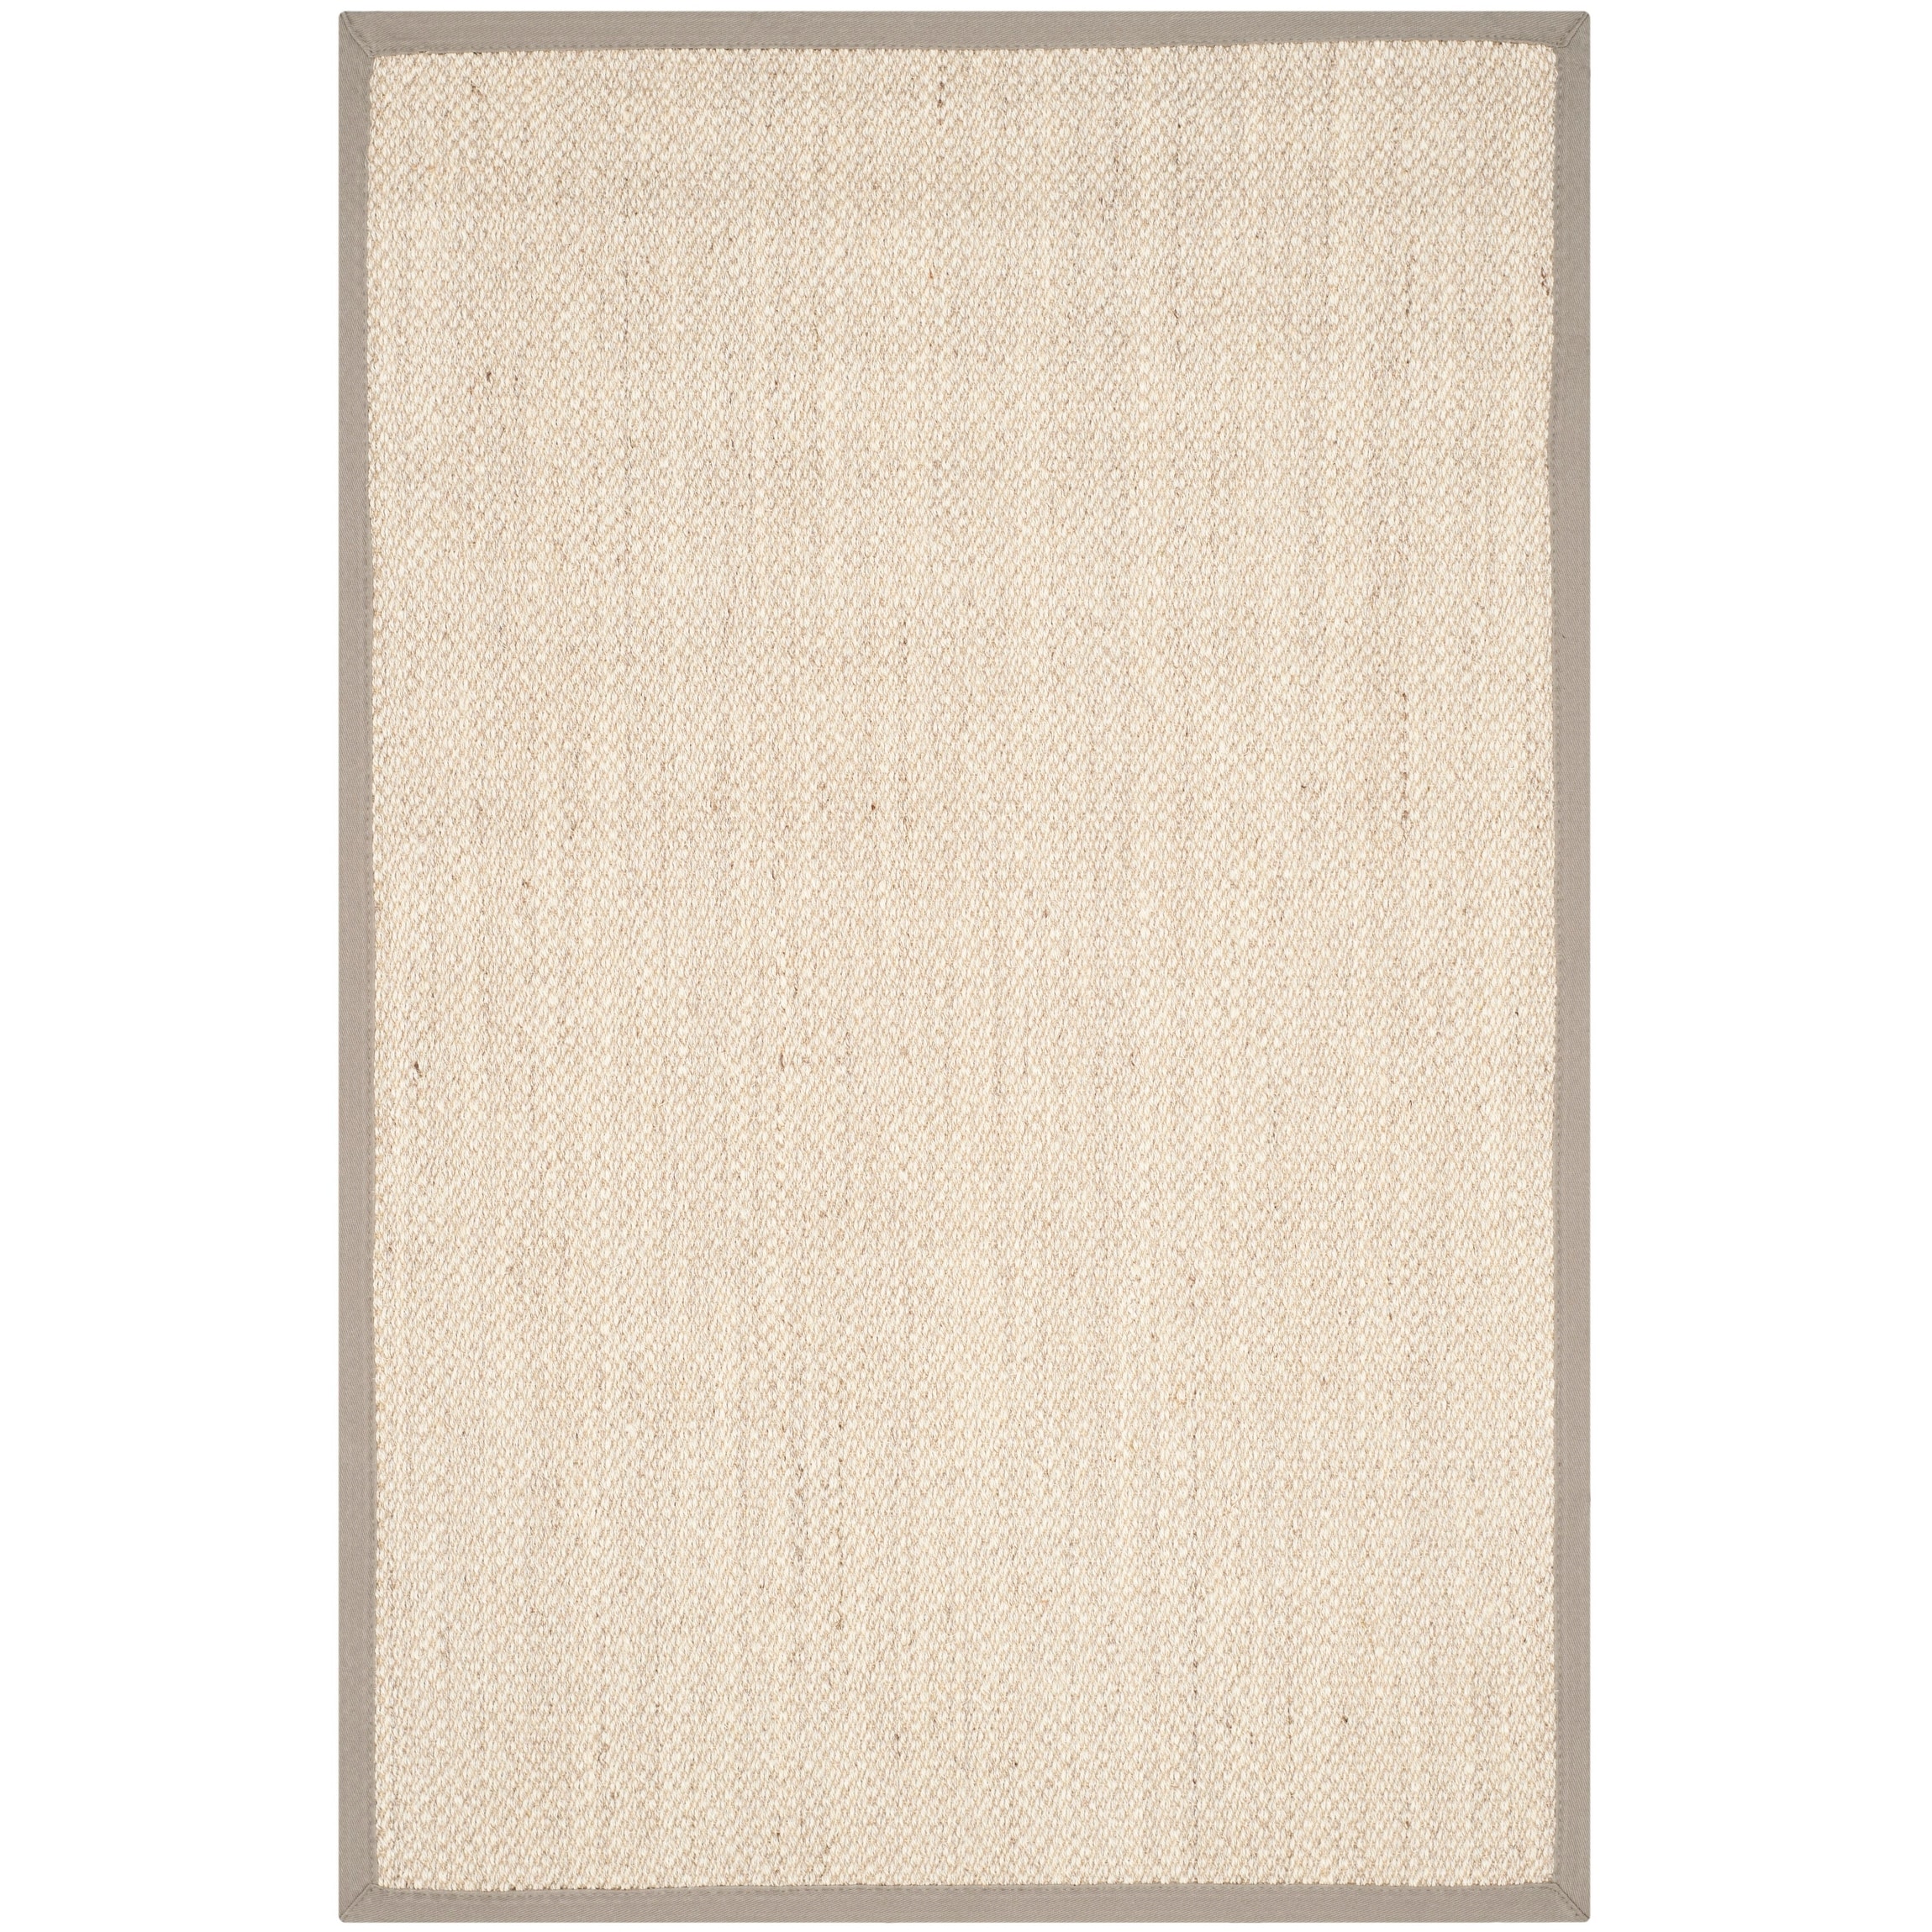 Safavieh Natural Fiber Collection NF143C Marble and Beige Sisal Area Rug  (8＆#39; x